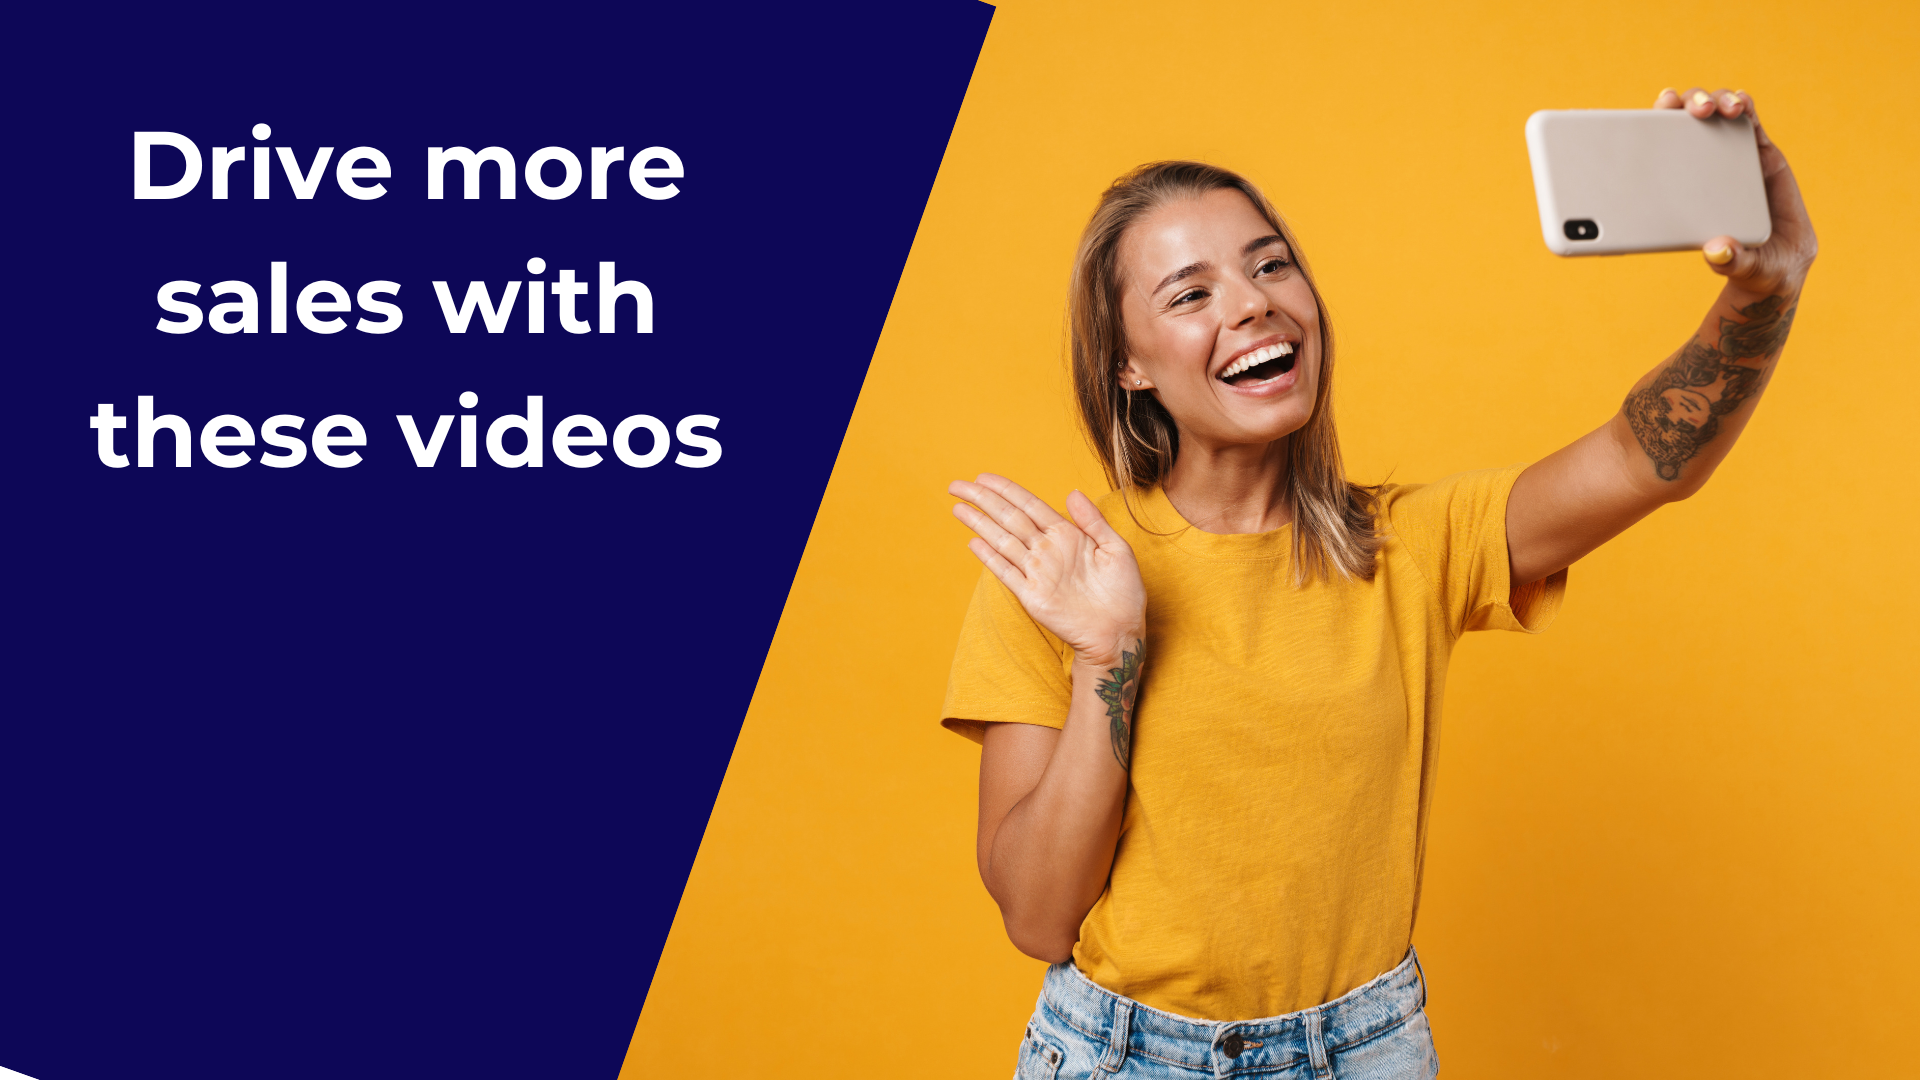 Drive more sales with these videos